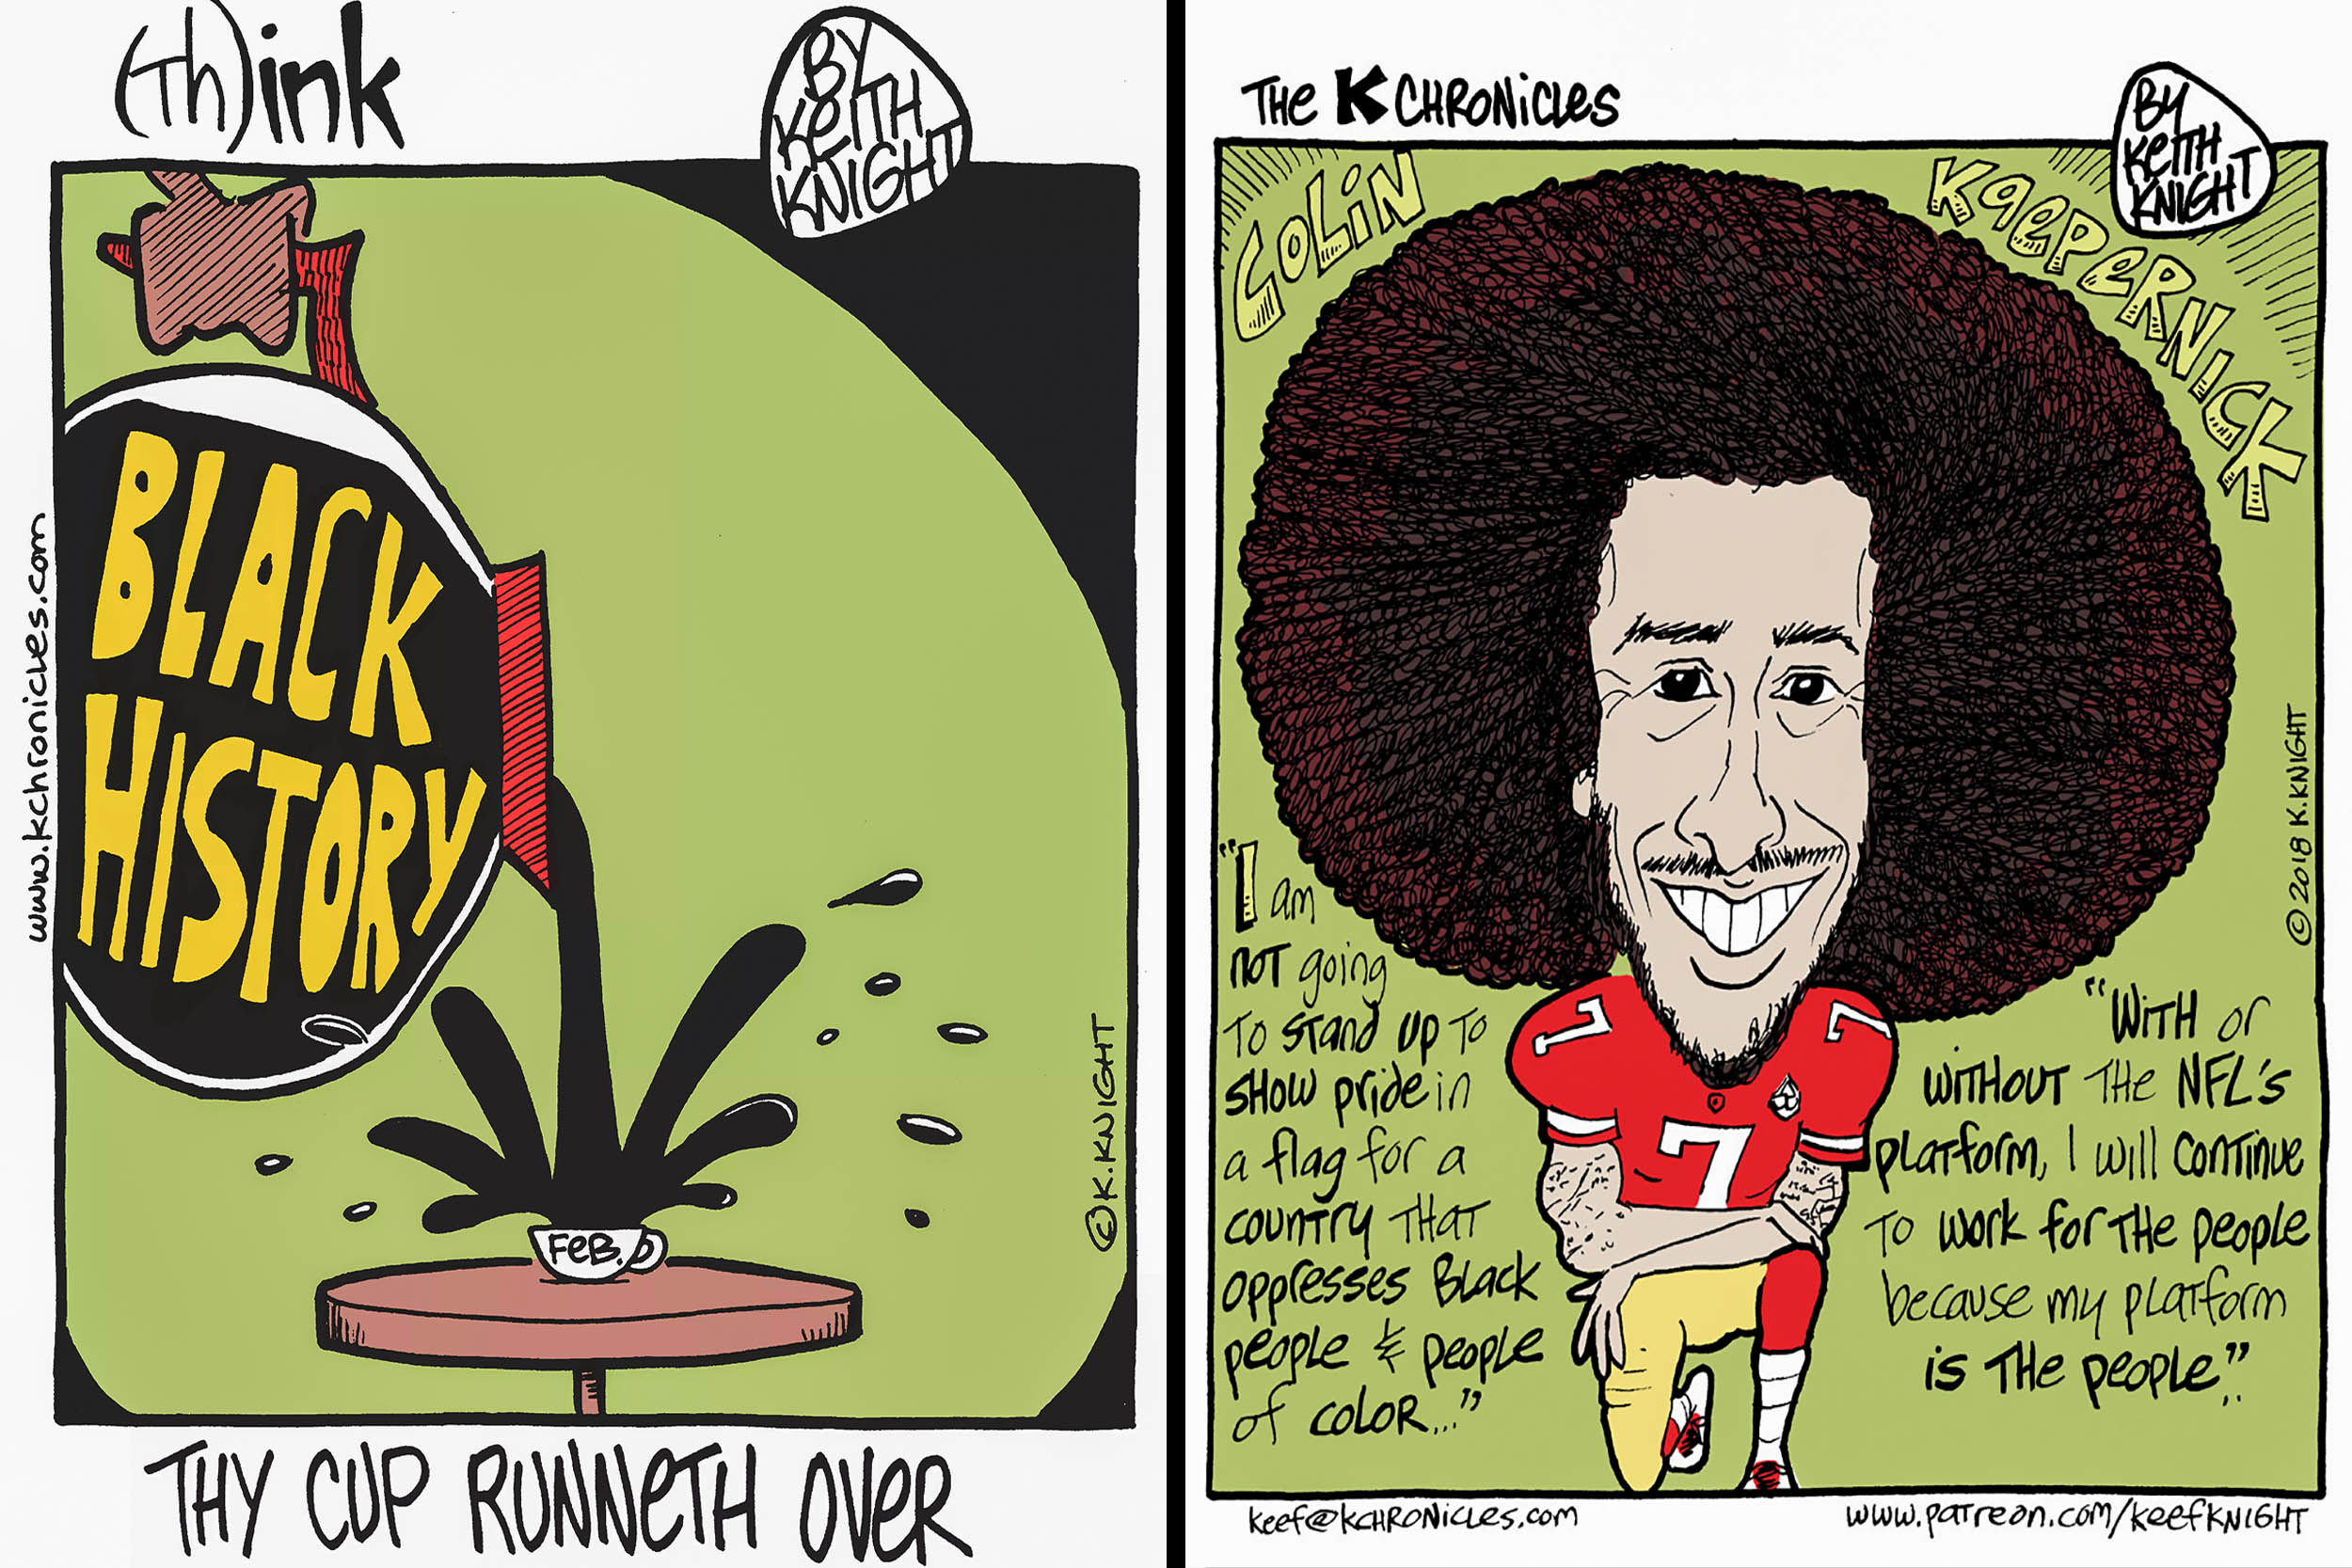 comic - left: Coffee pot  labeled black history pouring into a tiny cup labeled feb.  comic right: Colin Kaepernick smiling and kneeling in a San Francisco Uniform